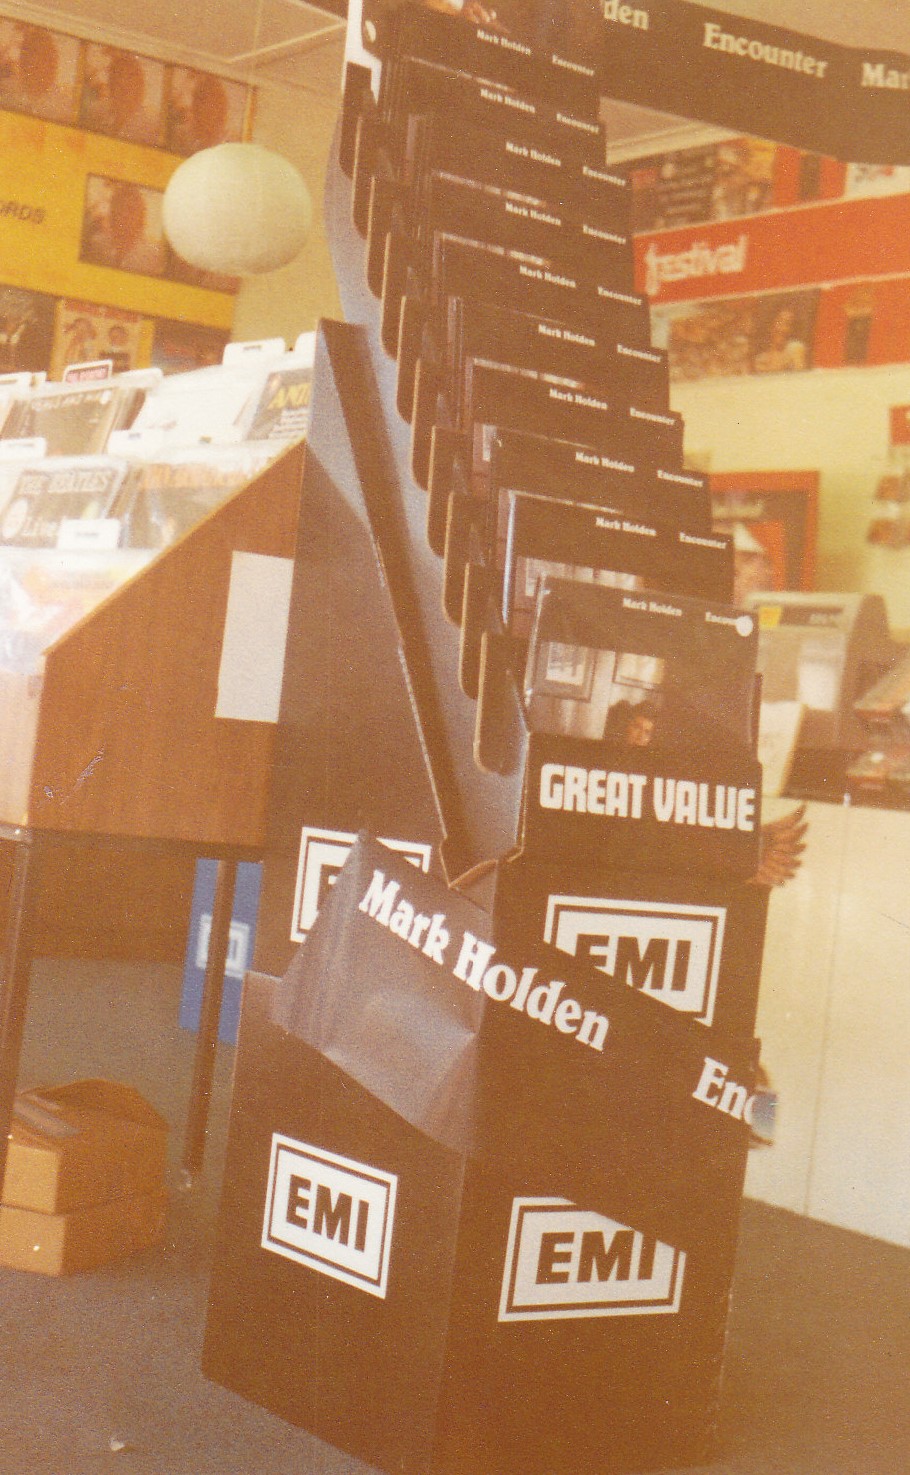 In store record display.